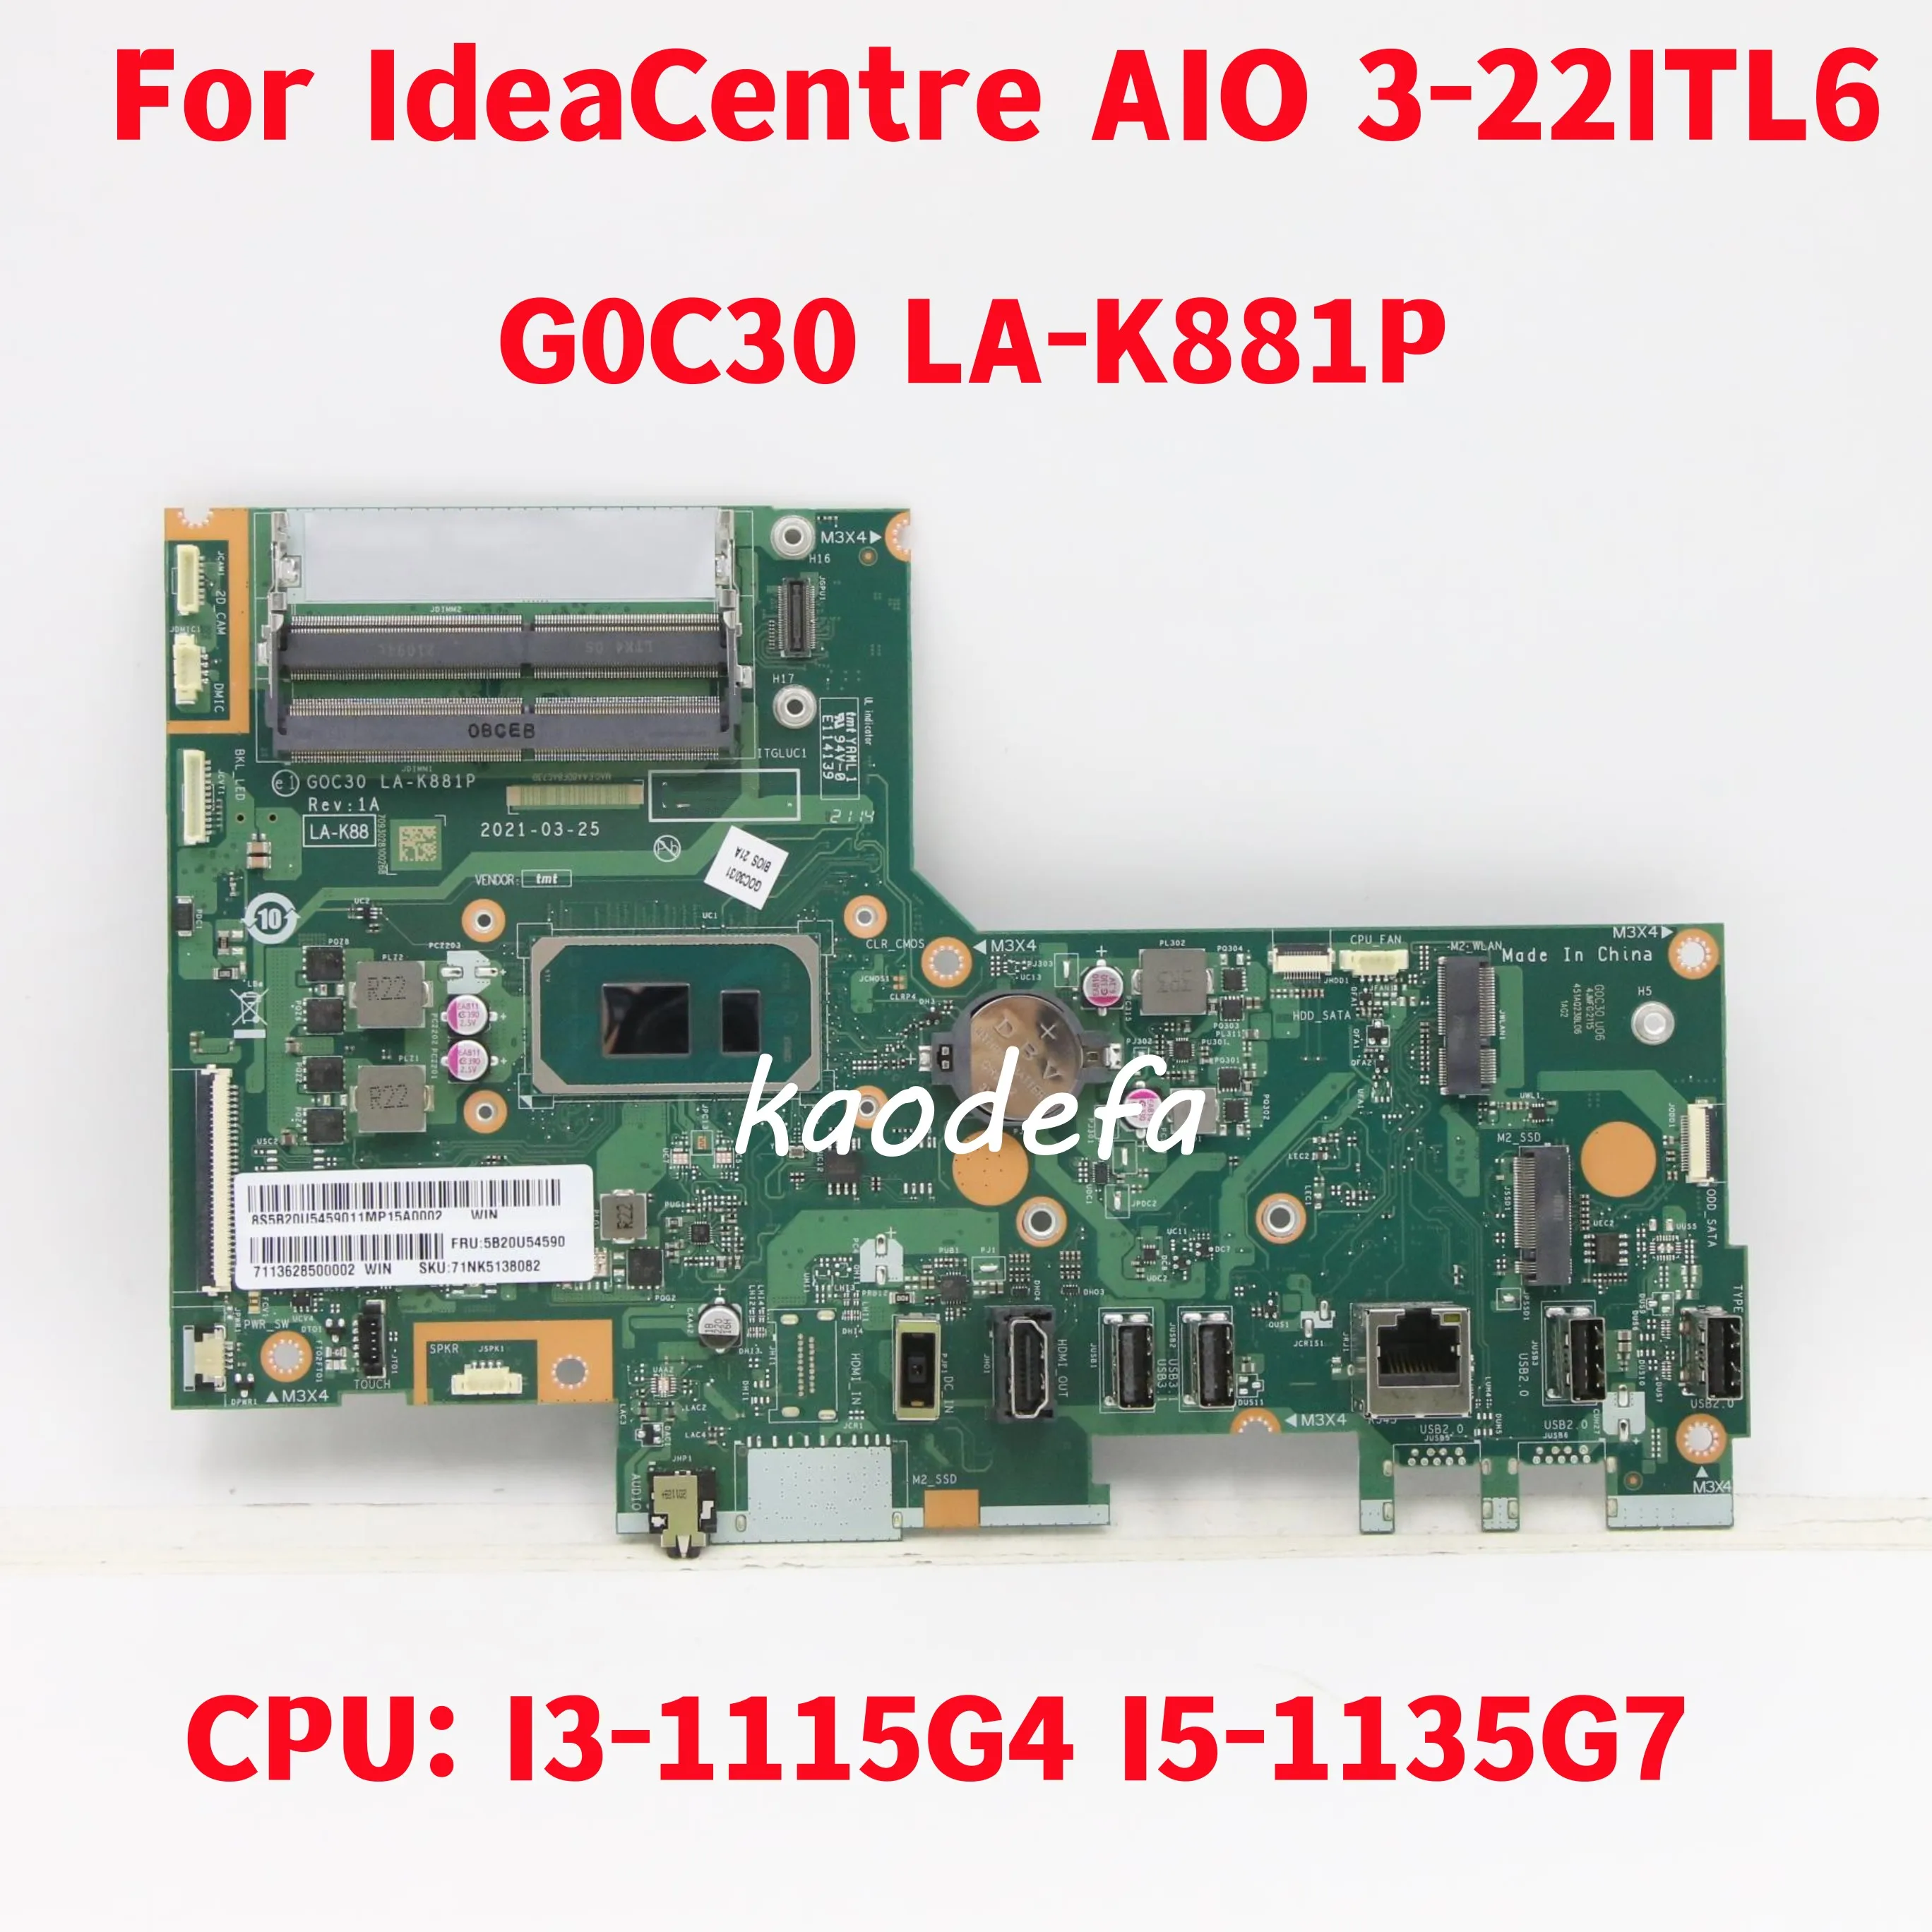 

G0C30 LA-K881P Mainboard For Lenovo IdeaCentre AIO 3-22ITL6 Laptop Motherboard CPU:I3-1115G4 I5-1135G7 DDR4 100% Tested Fully OK